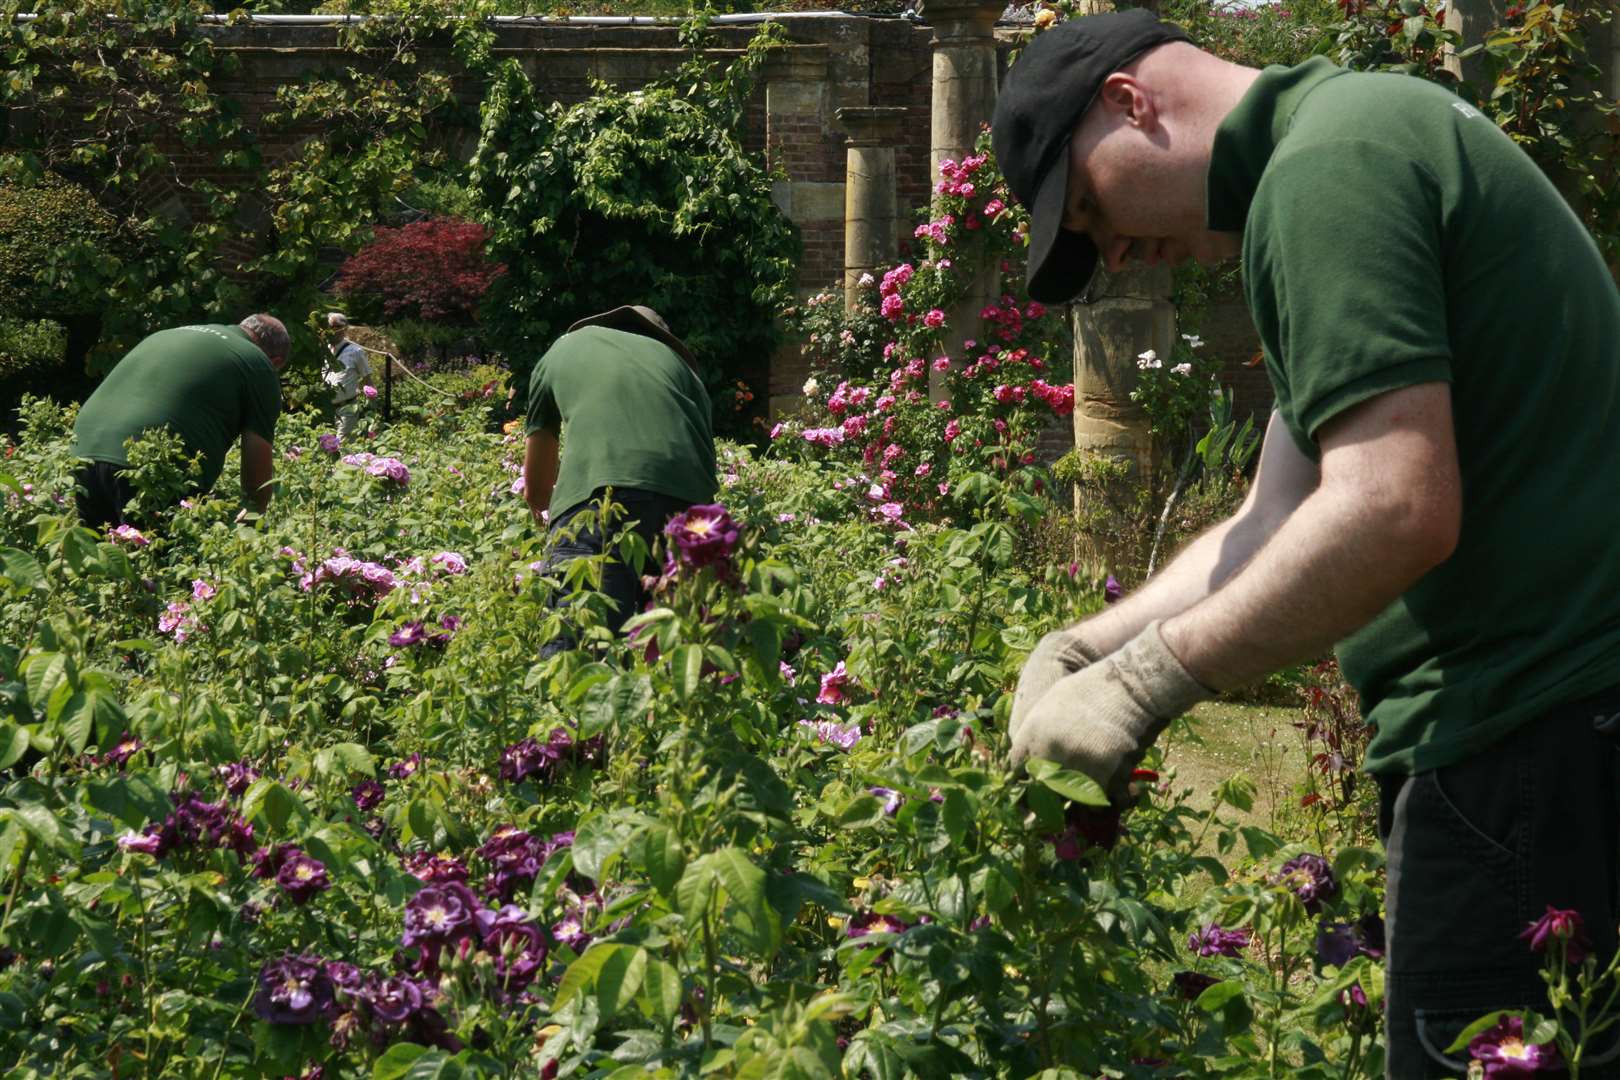 Horticulturalists learn on the job every day of their working lives